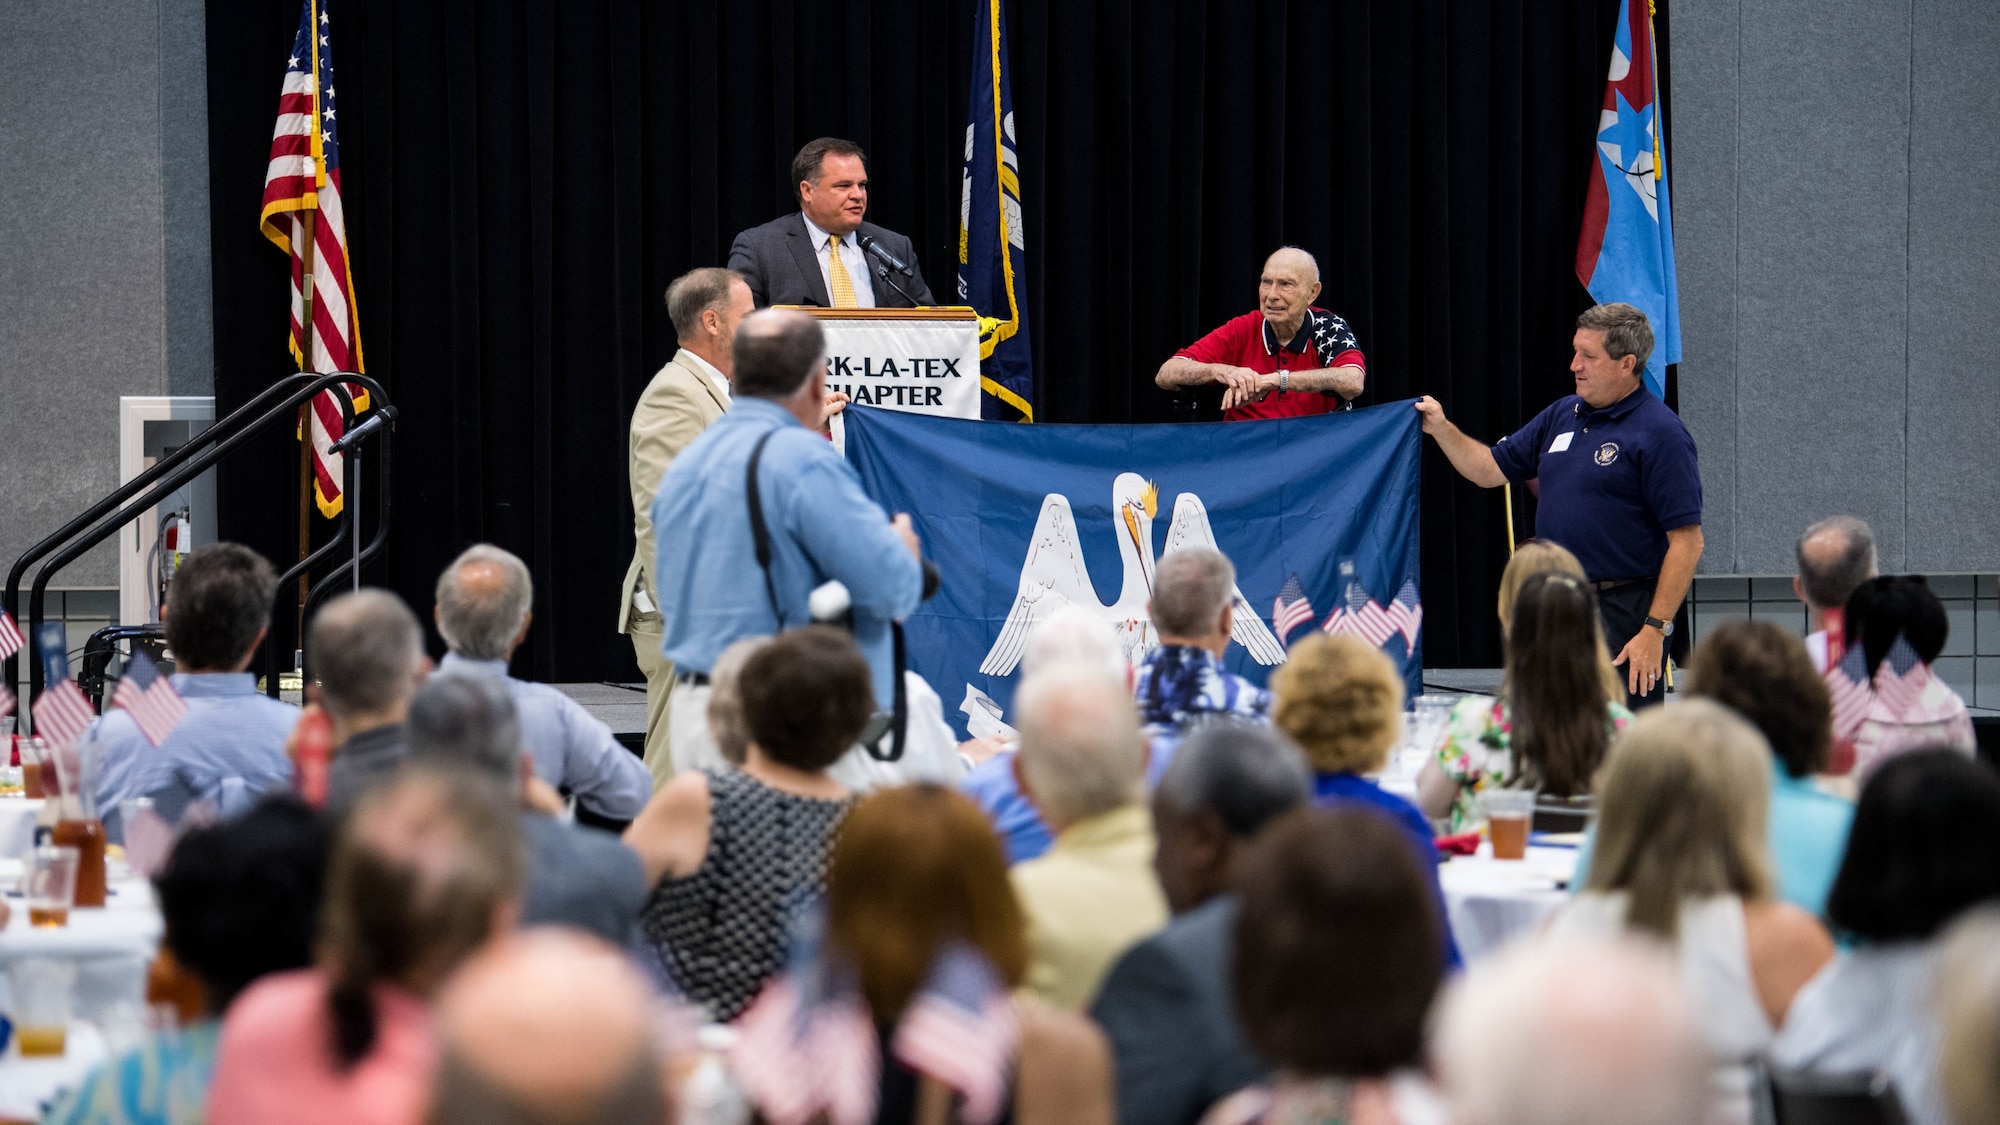 Louisiana State Senator Ryan Gatti (left), presents retired Col. Steven L. dePyssler (right) 2nd Mission Support Group retiree affairs director, with a Louisiana state flag that was flown at the Louisiana State Capitol Building during dePyssler's 100th birthday celebration at the Bossier Civic Center, Bossier City, Louisiana, July 19, 2019. dePyssler served in four different wars during his 38 years of active duty service. (U.S. Air Force photo by Airman Jacob B. Wrightsman)